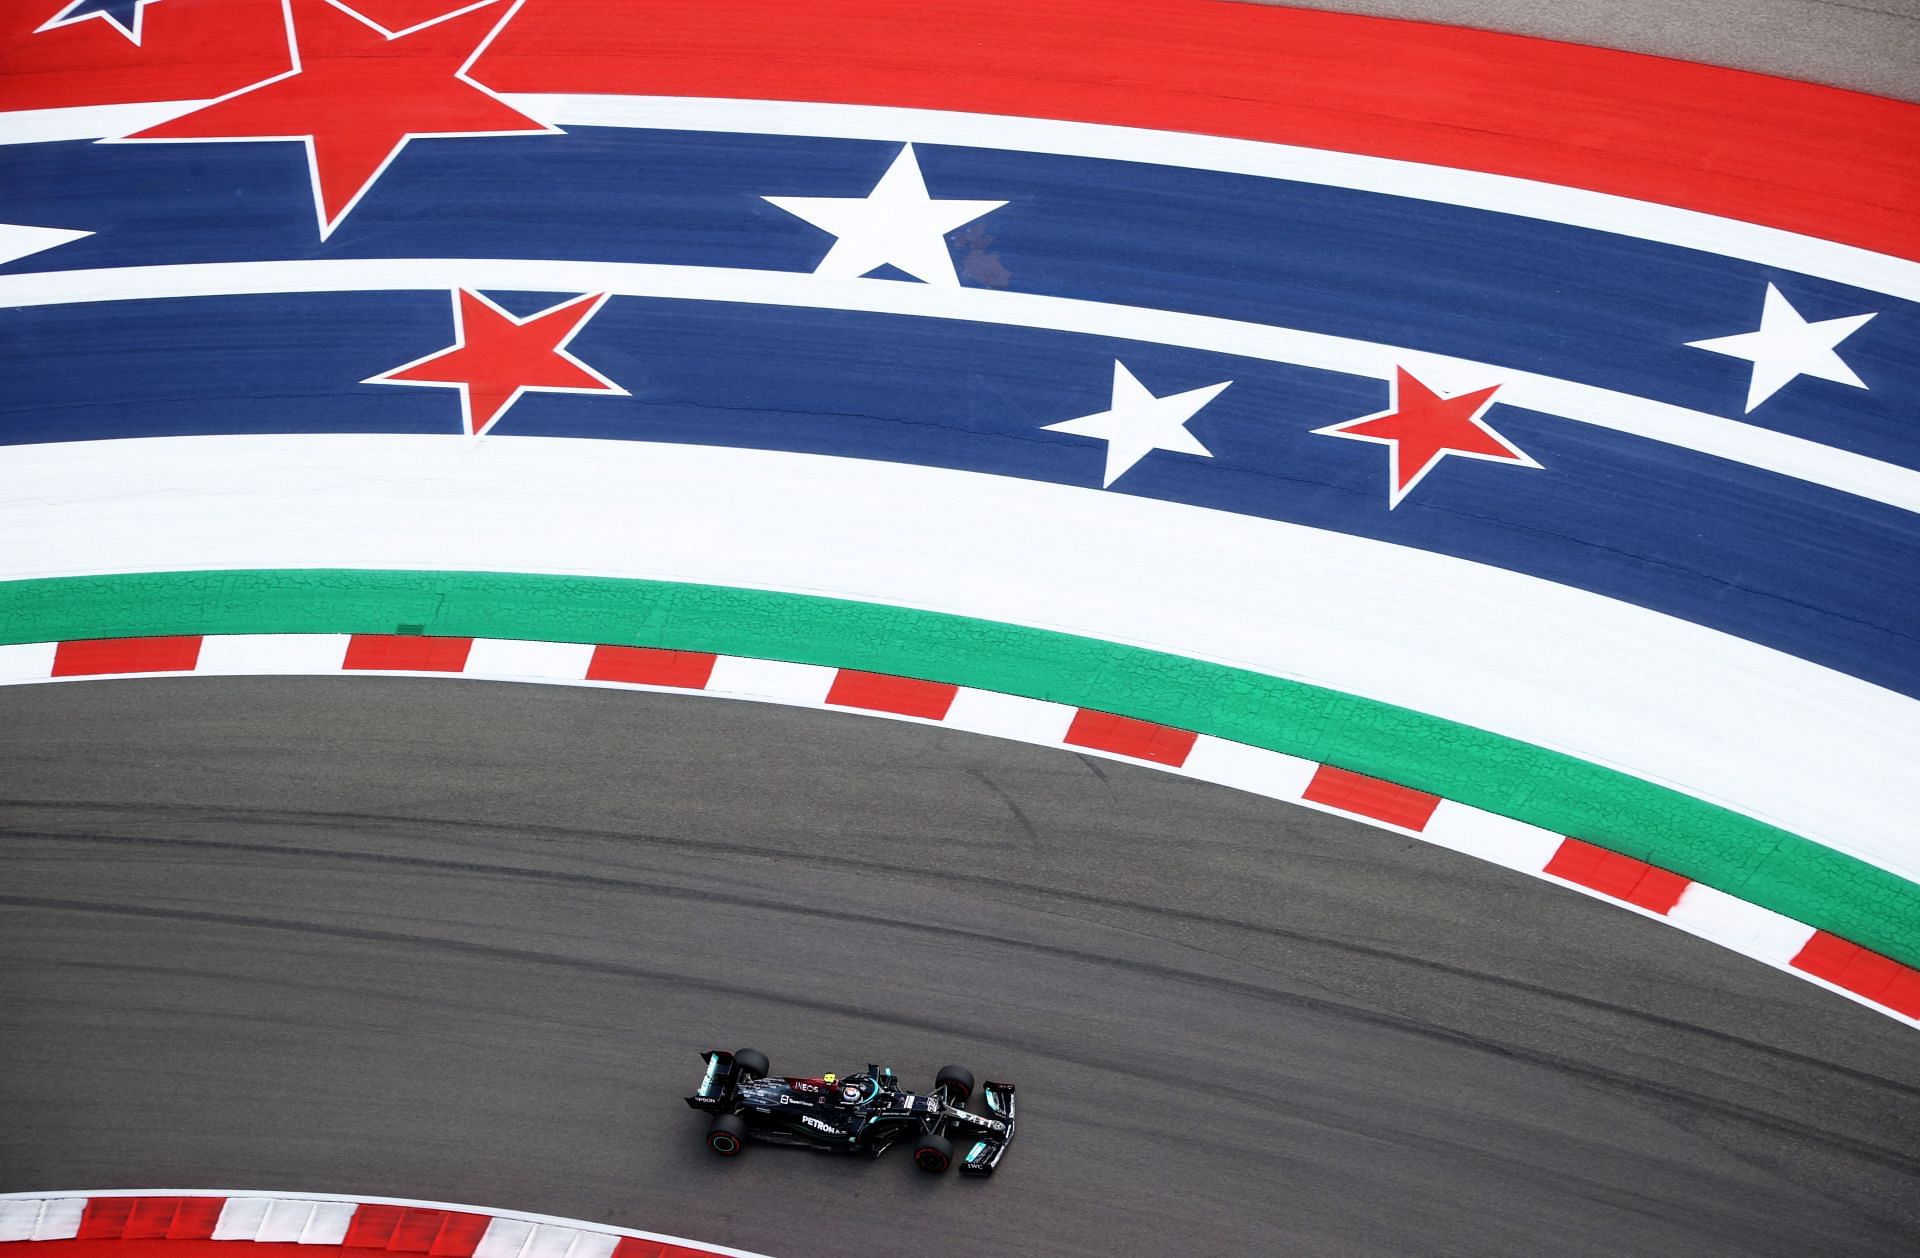 Valtteri Bottas of driving the Mercedes W12 during practice ahead of the 2021 USGP in Austin, Texas. (Photo by Chris Graythen/Getty Images)